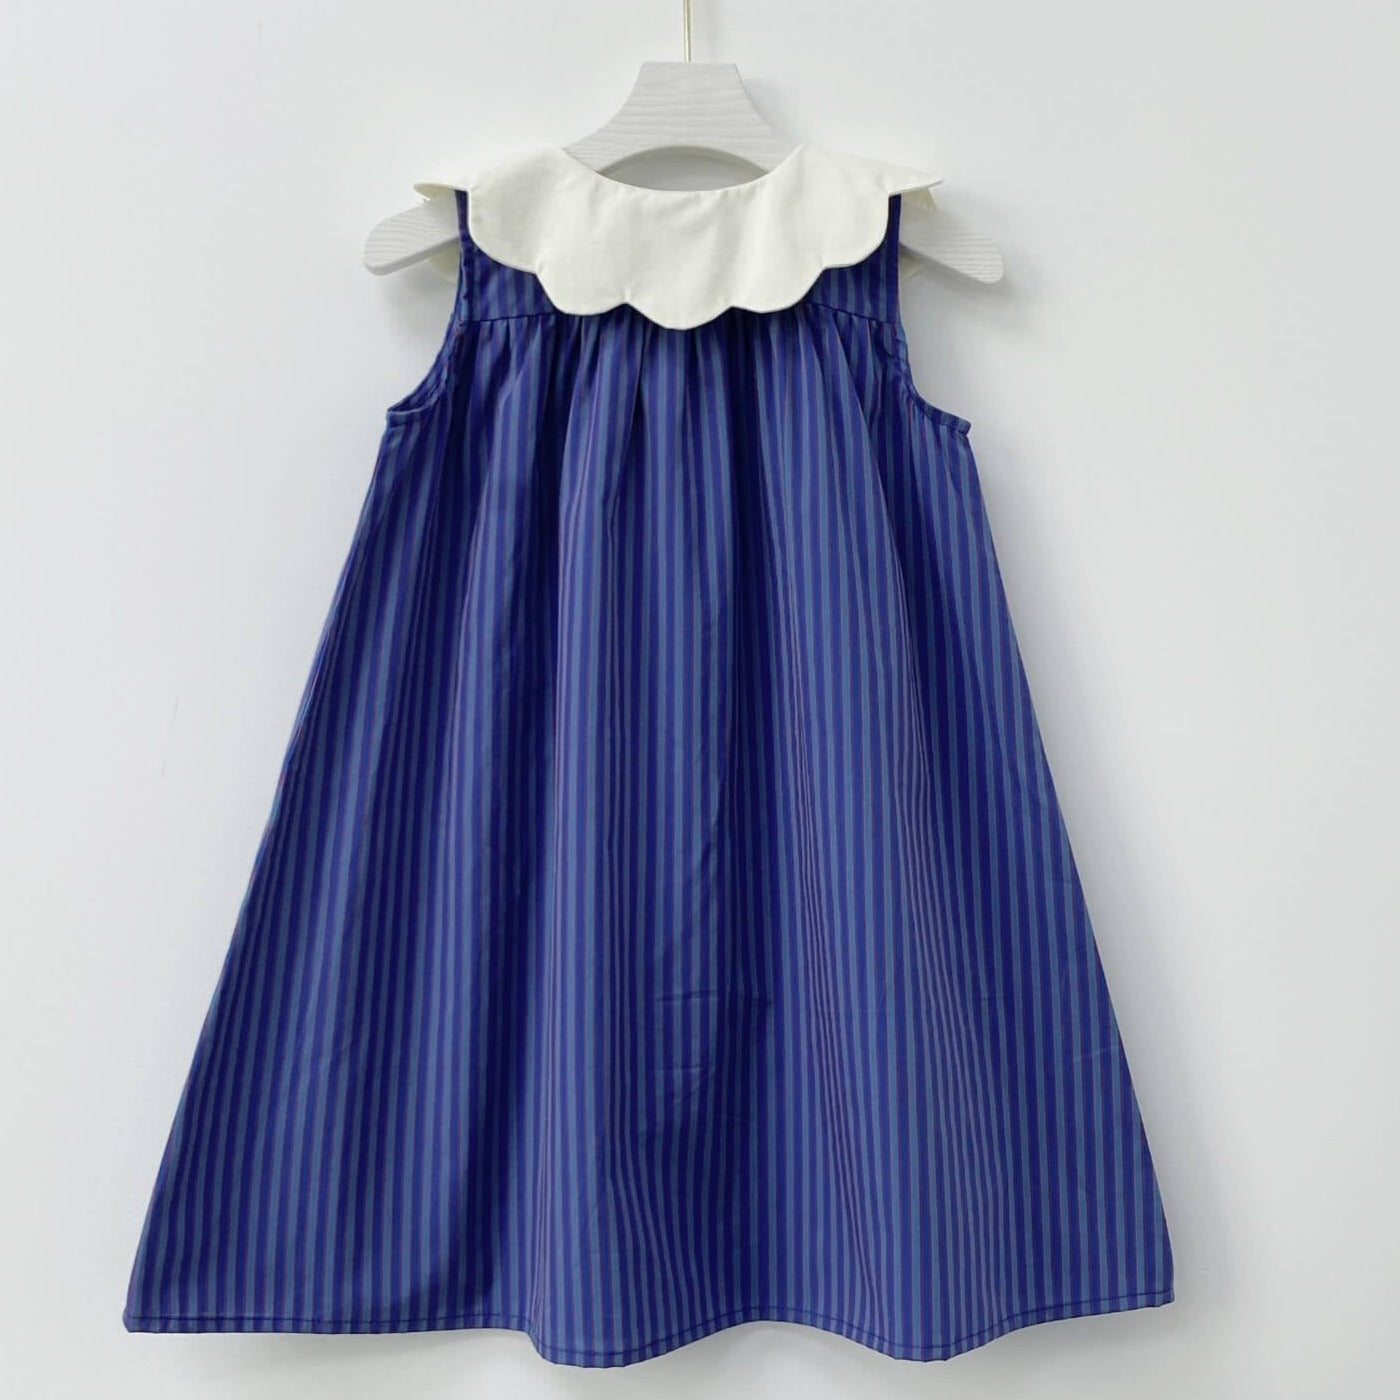 Adorable Scallop Collar Stripped Dress,2T to 8T.